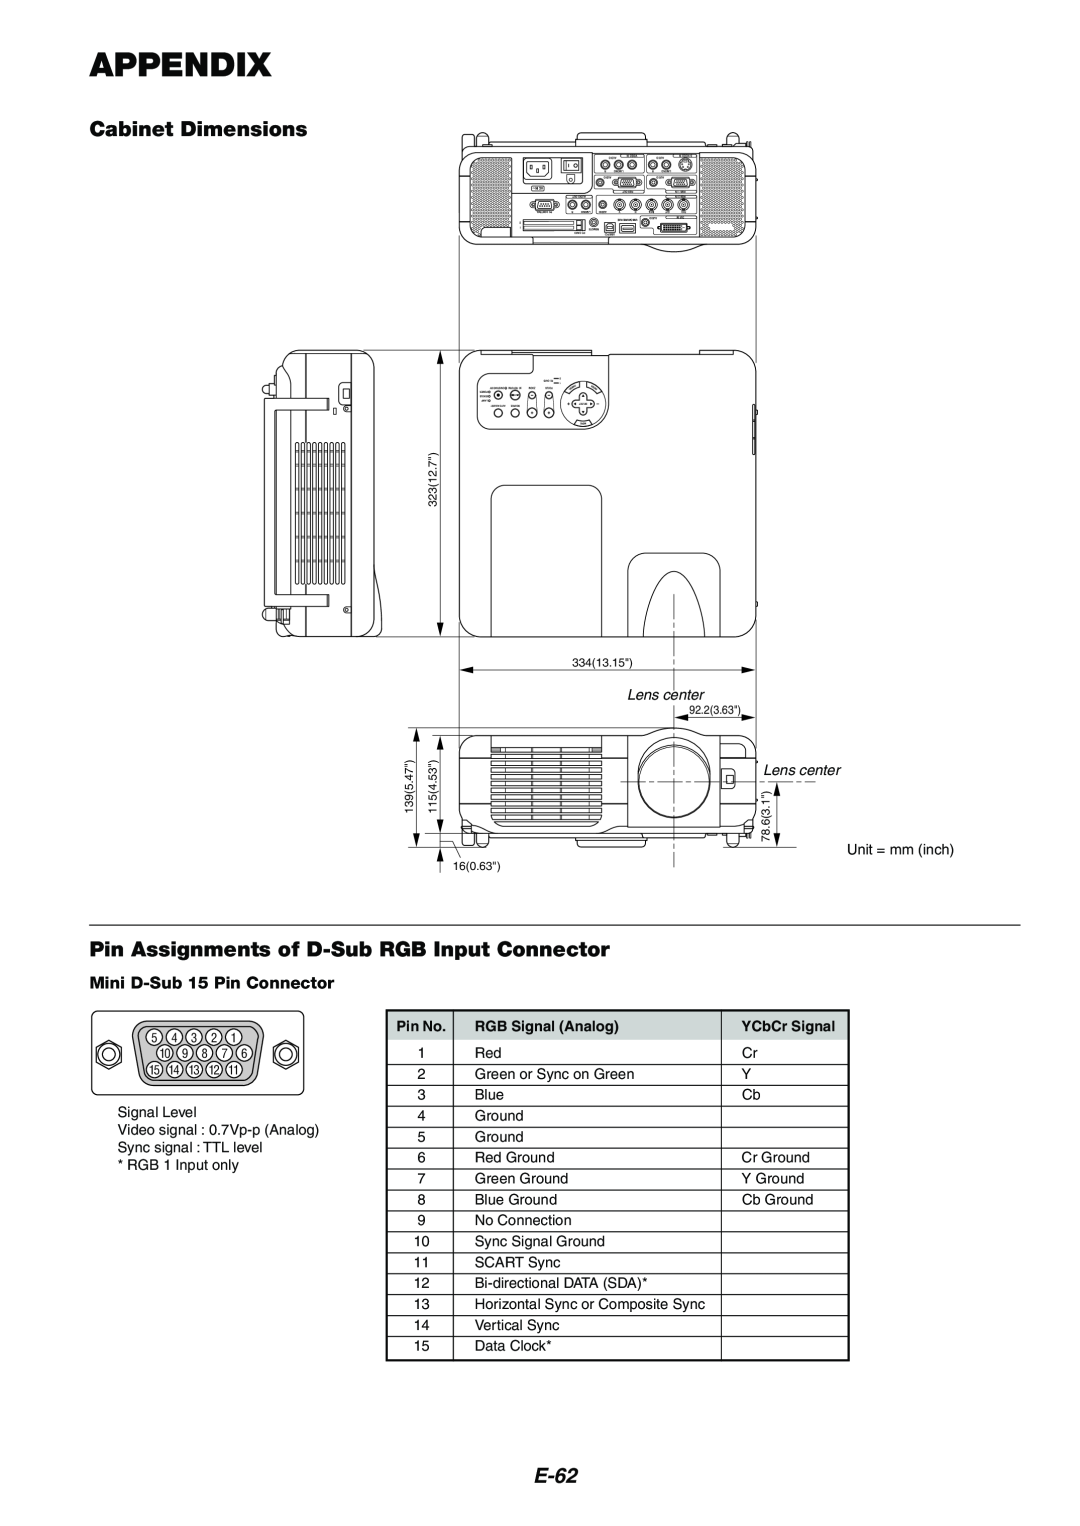 NEC MT1075/MT1065 Appendix, Cabinet Dimensions, Pin Assignments of D-SubRGB Input Connector, E-62, Pin No, YCbCr Signal 